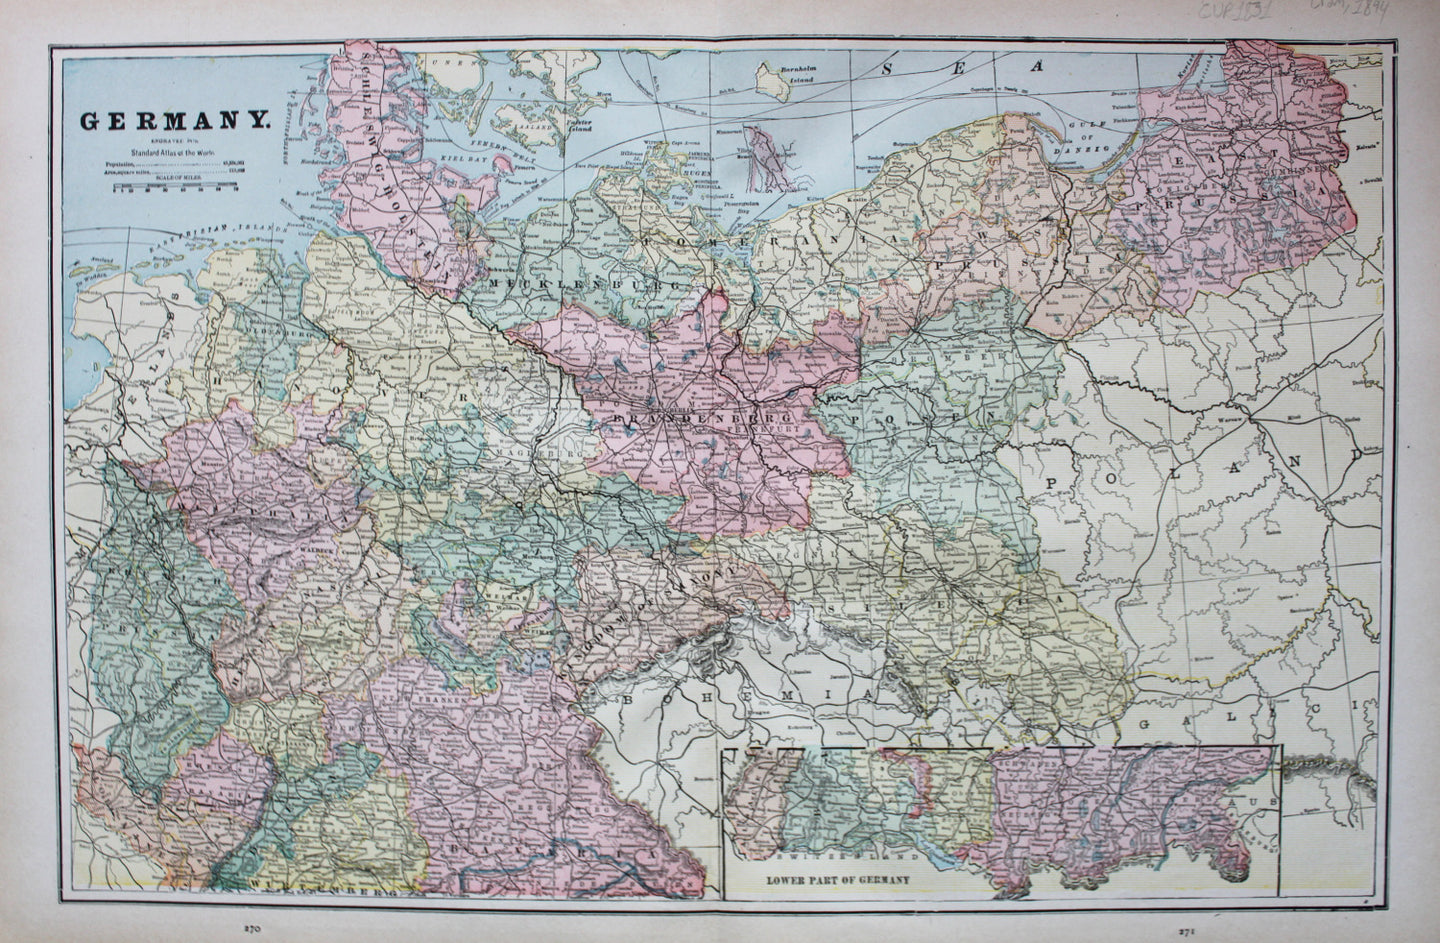 Antique-Printed-Color-Map-Germany-verso:-Spain-&-Portugal-and-City-of-Berlin-Europe-Germany-Spain-&-Portugal-1894-Cram-Maps-Of-Antiquity